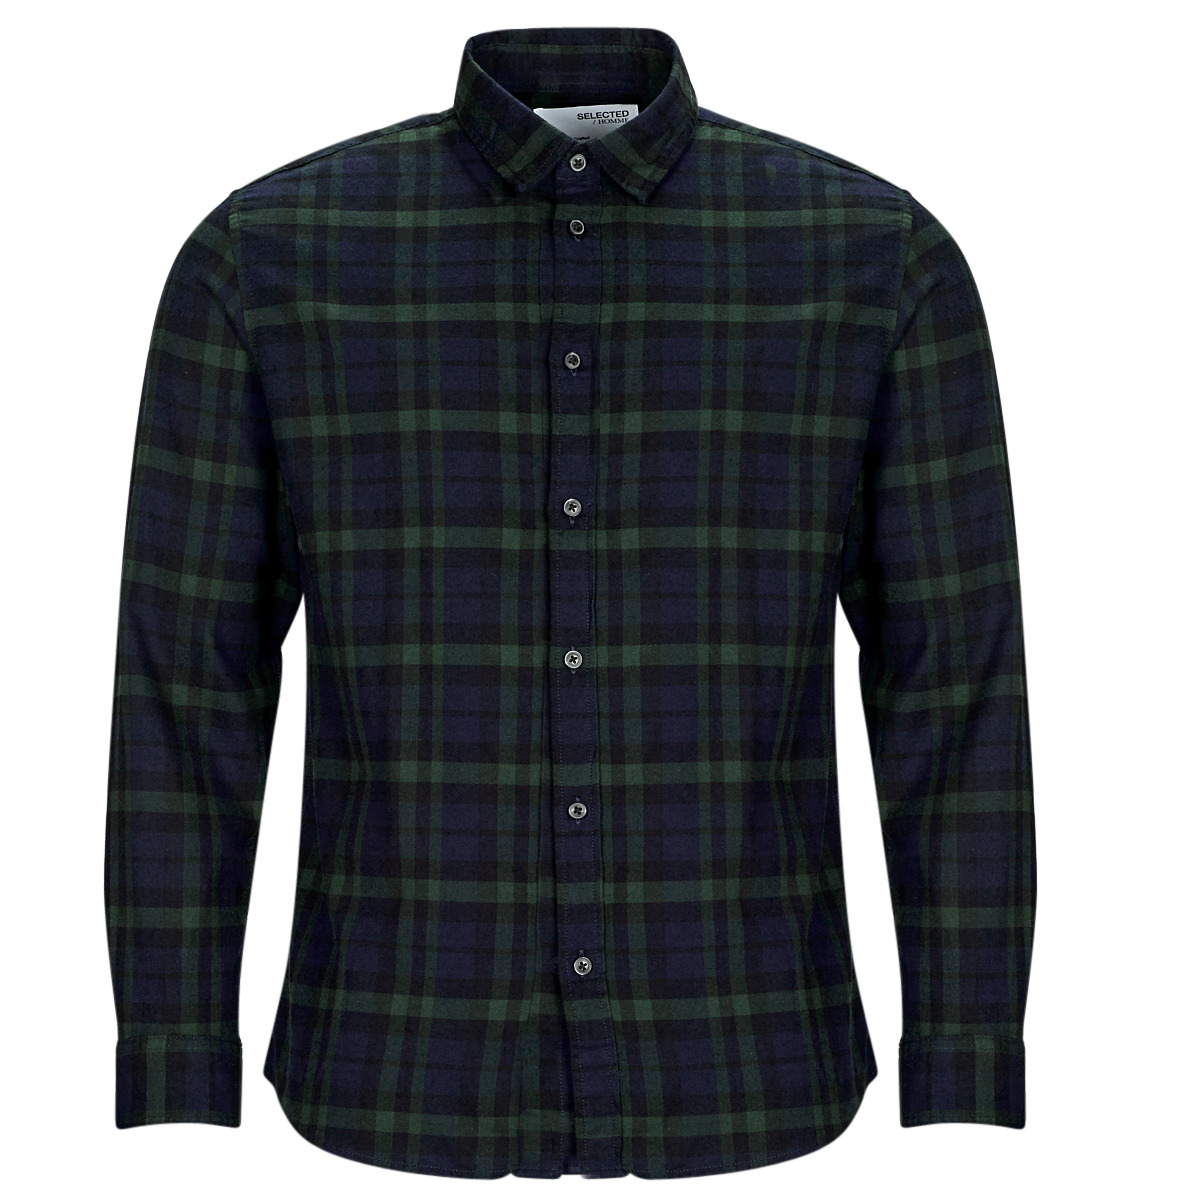 Selected Marine SLHSLIMOWEN-FLANNEL SHIRT LS NOOS Cg6SpY9a